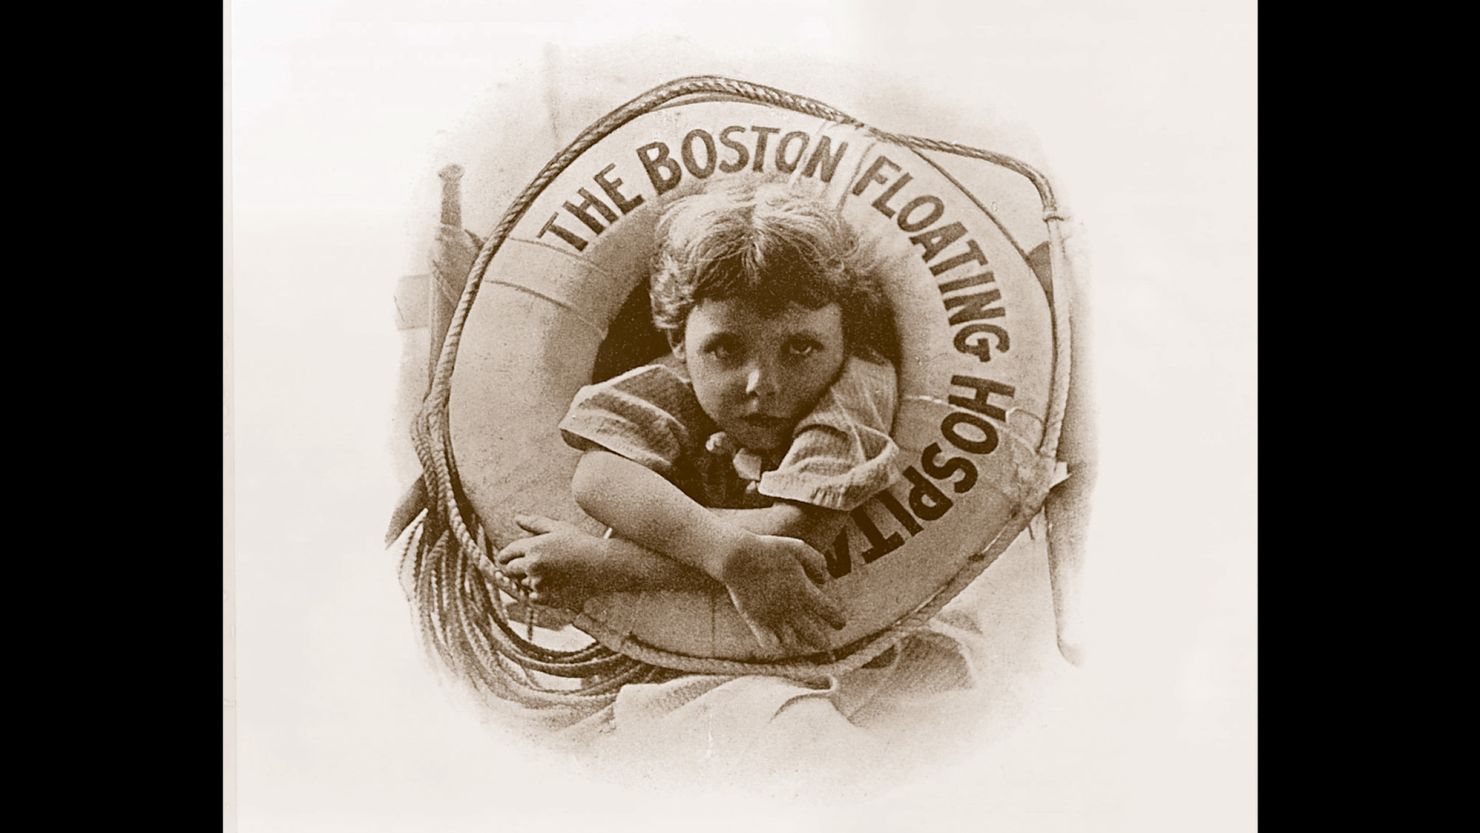 Tufts Medical Center staff members are hoping to identify the child in this 1914 image.